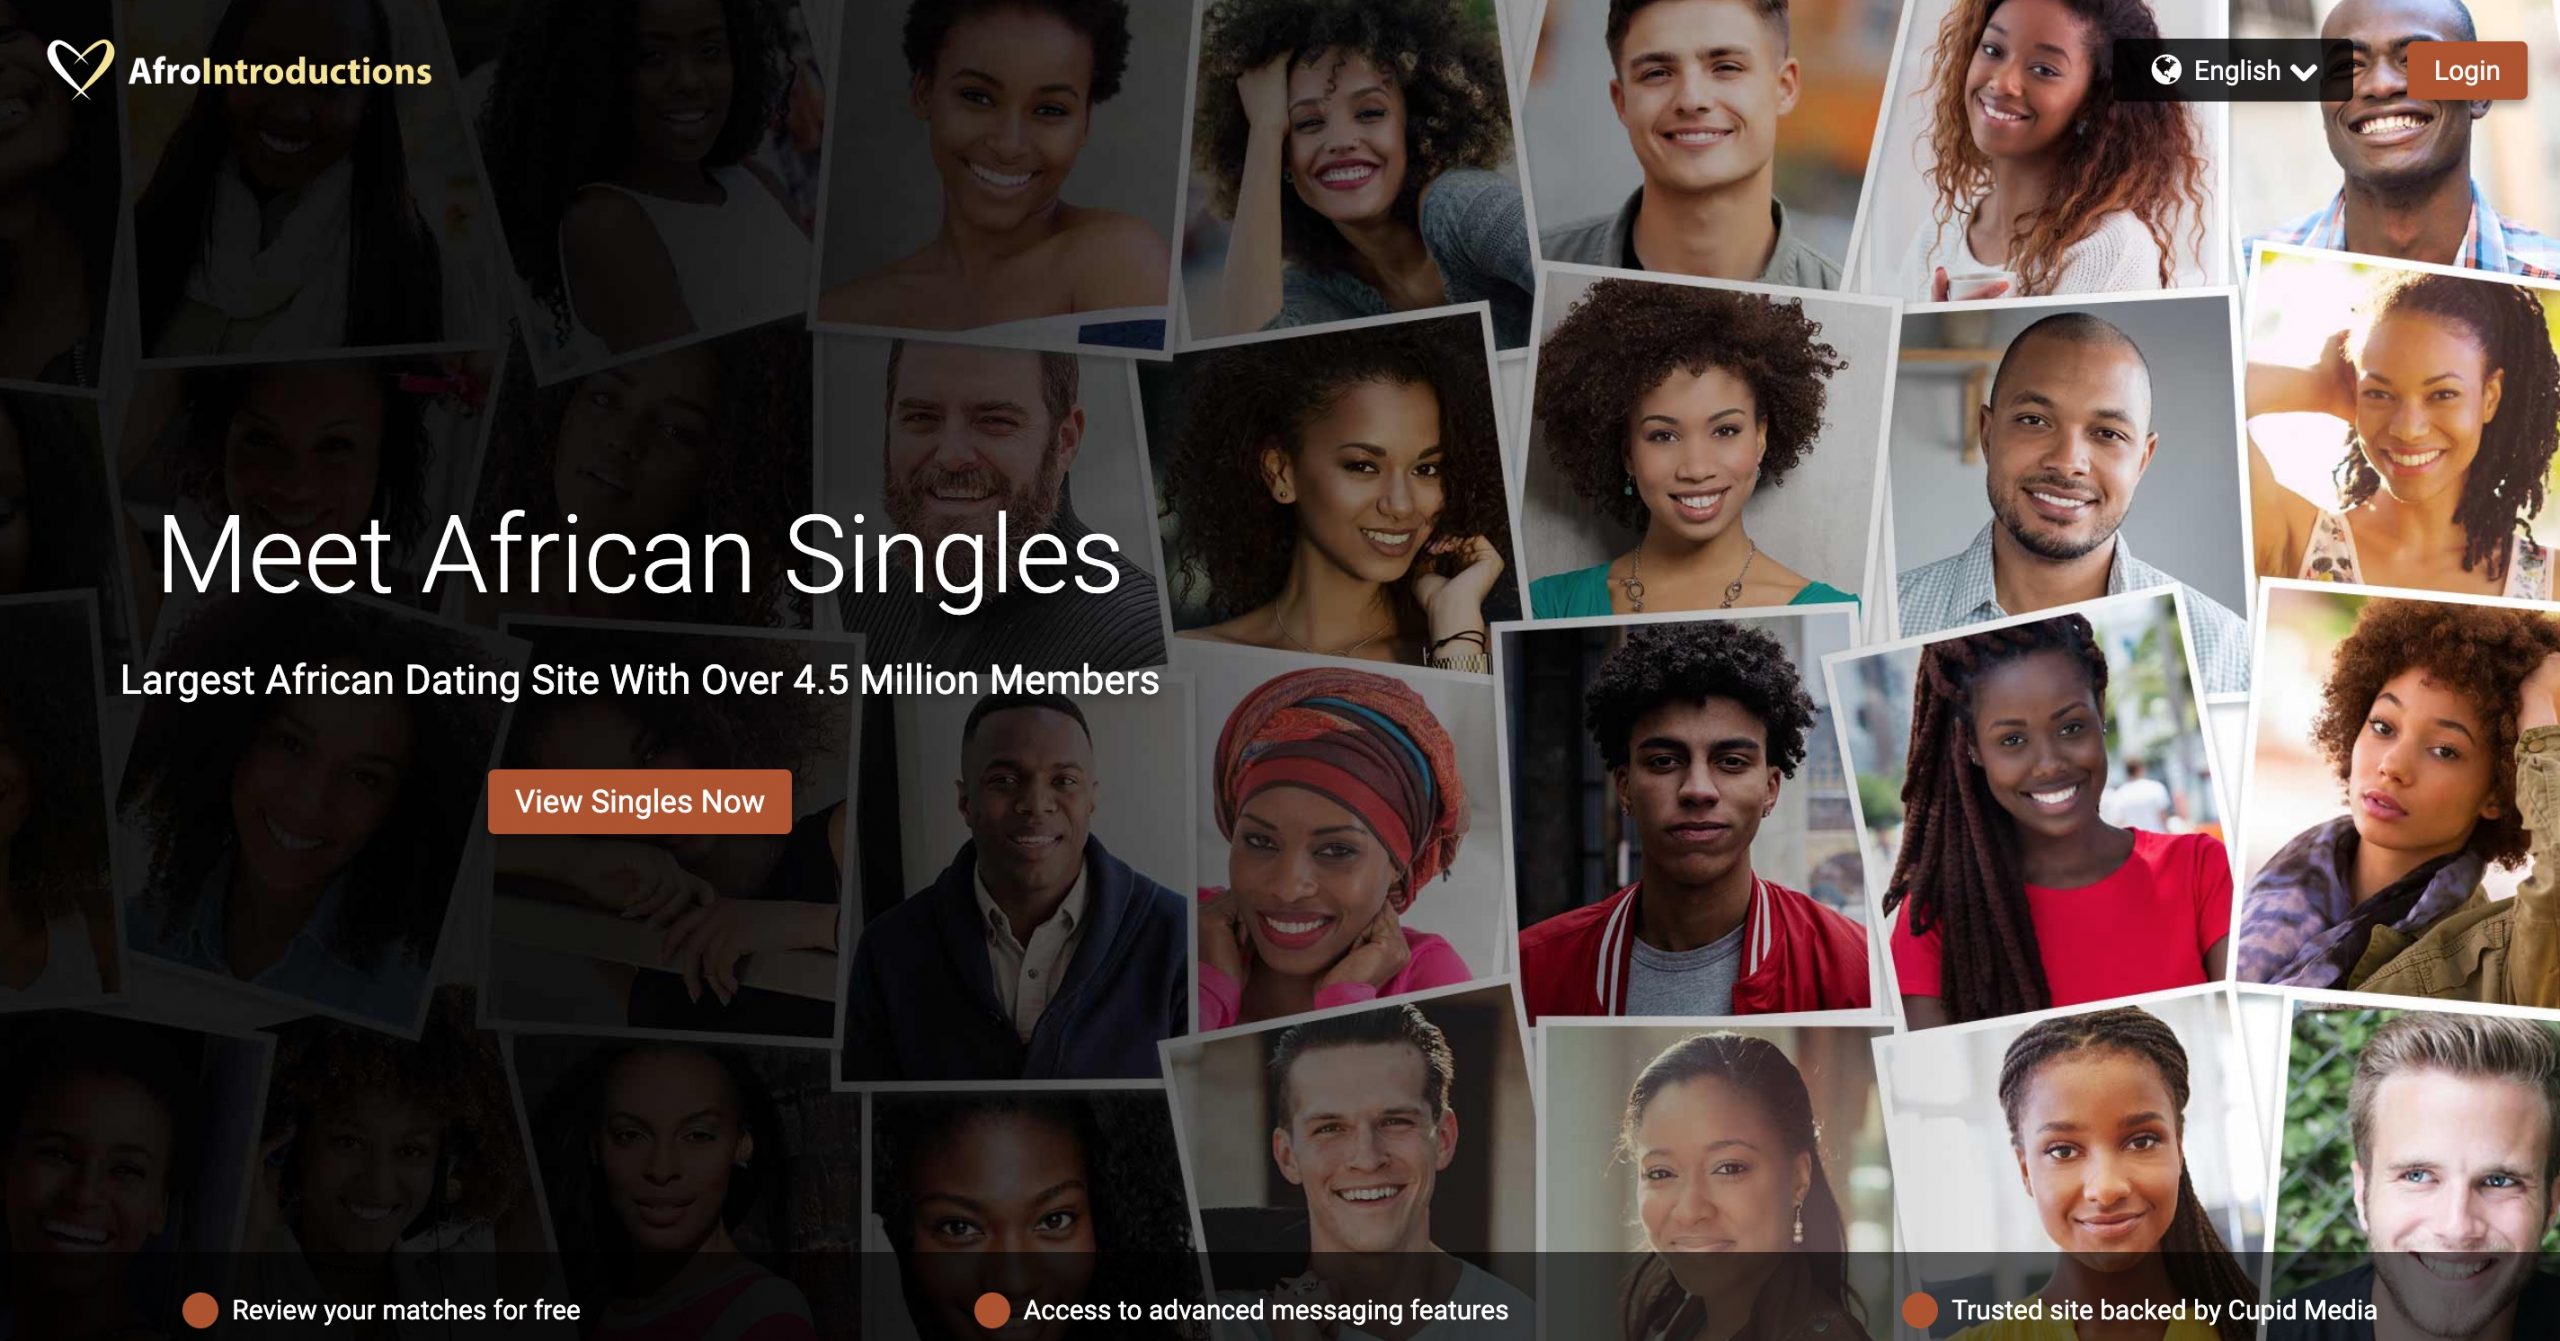 What are the best online dating sites for ethiopian singles?